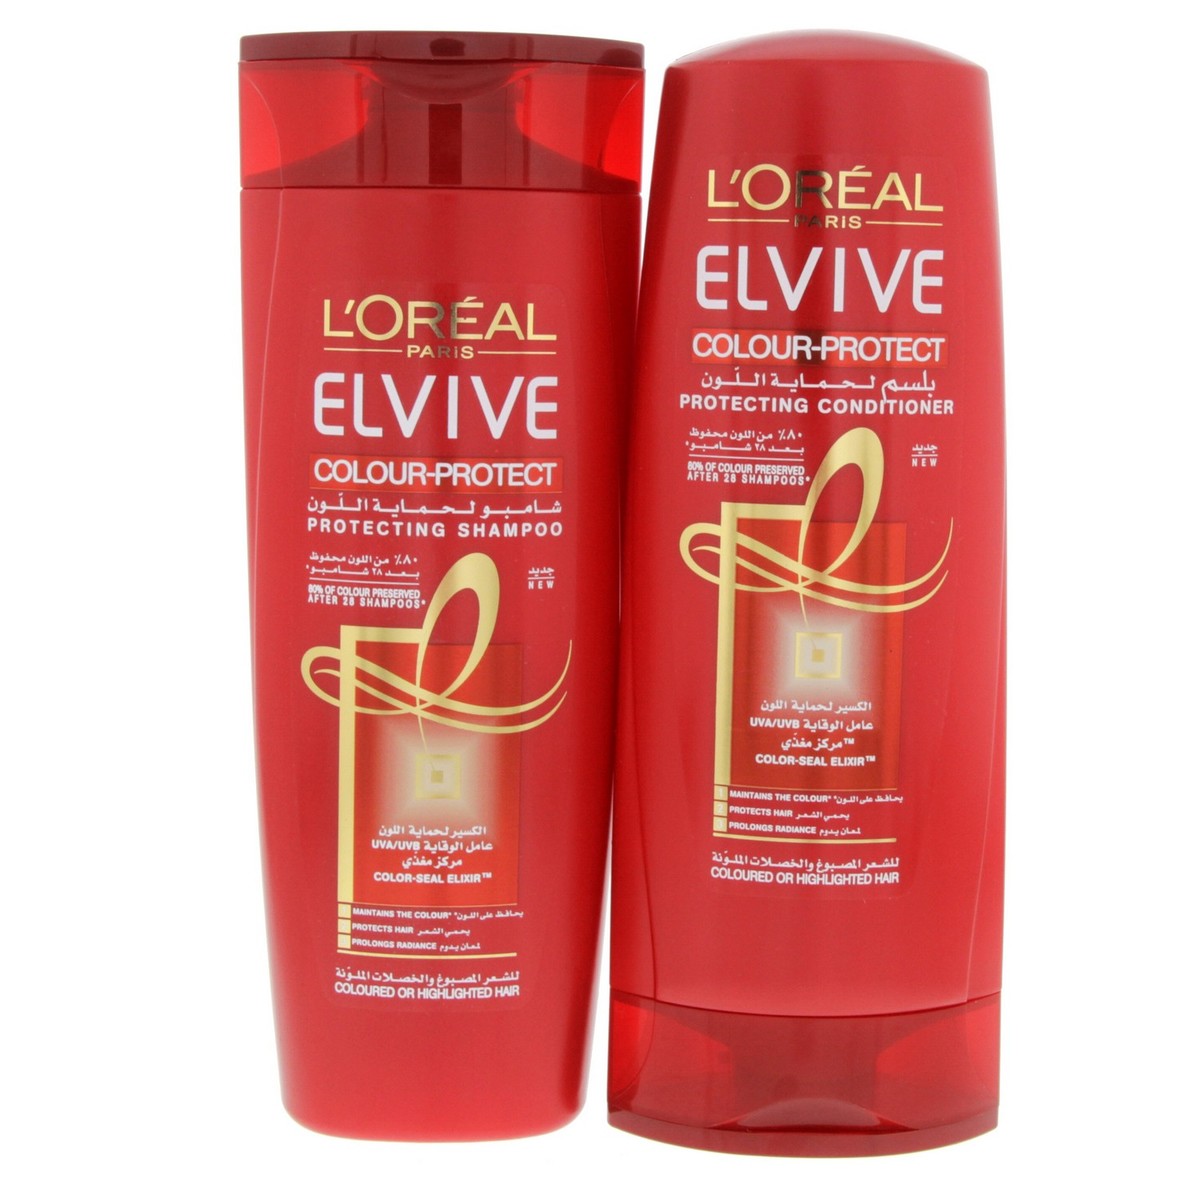 Buy Loreal Elvive Colour-Protect Shampoo 400ml + Conditioner 400ml